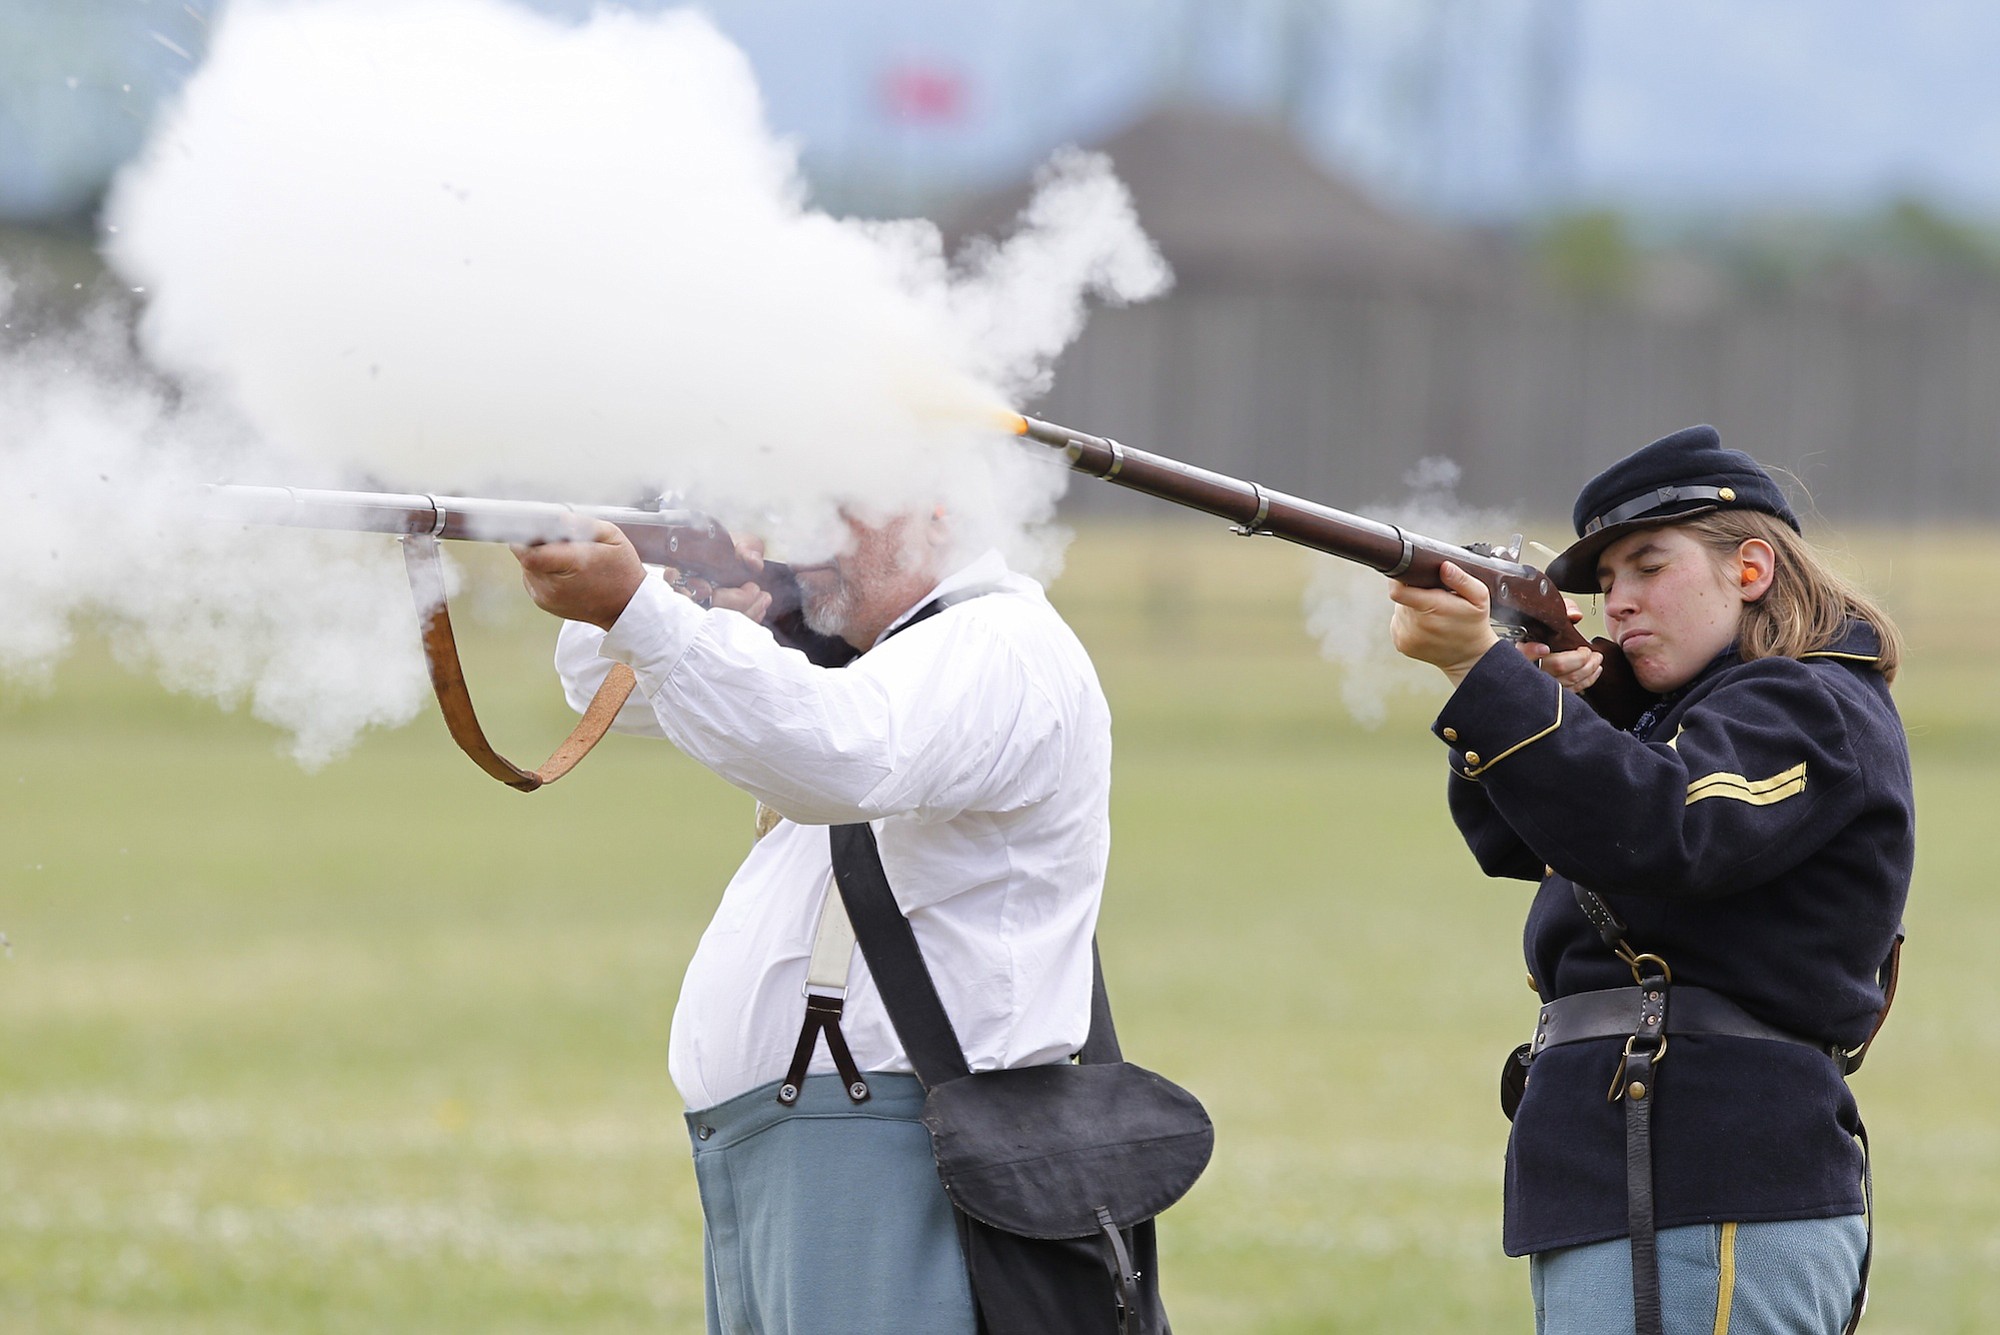 Volunteers prep for black powder shooting demonstrations at fort The